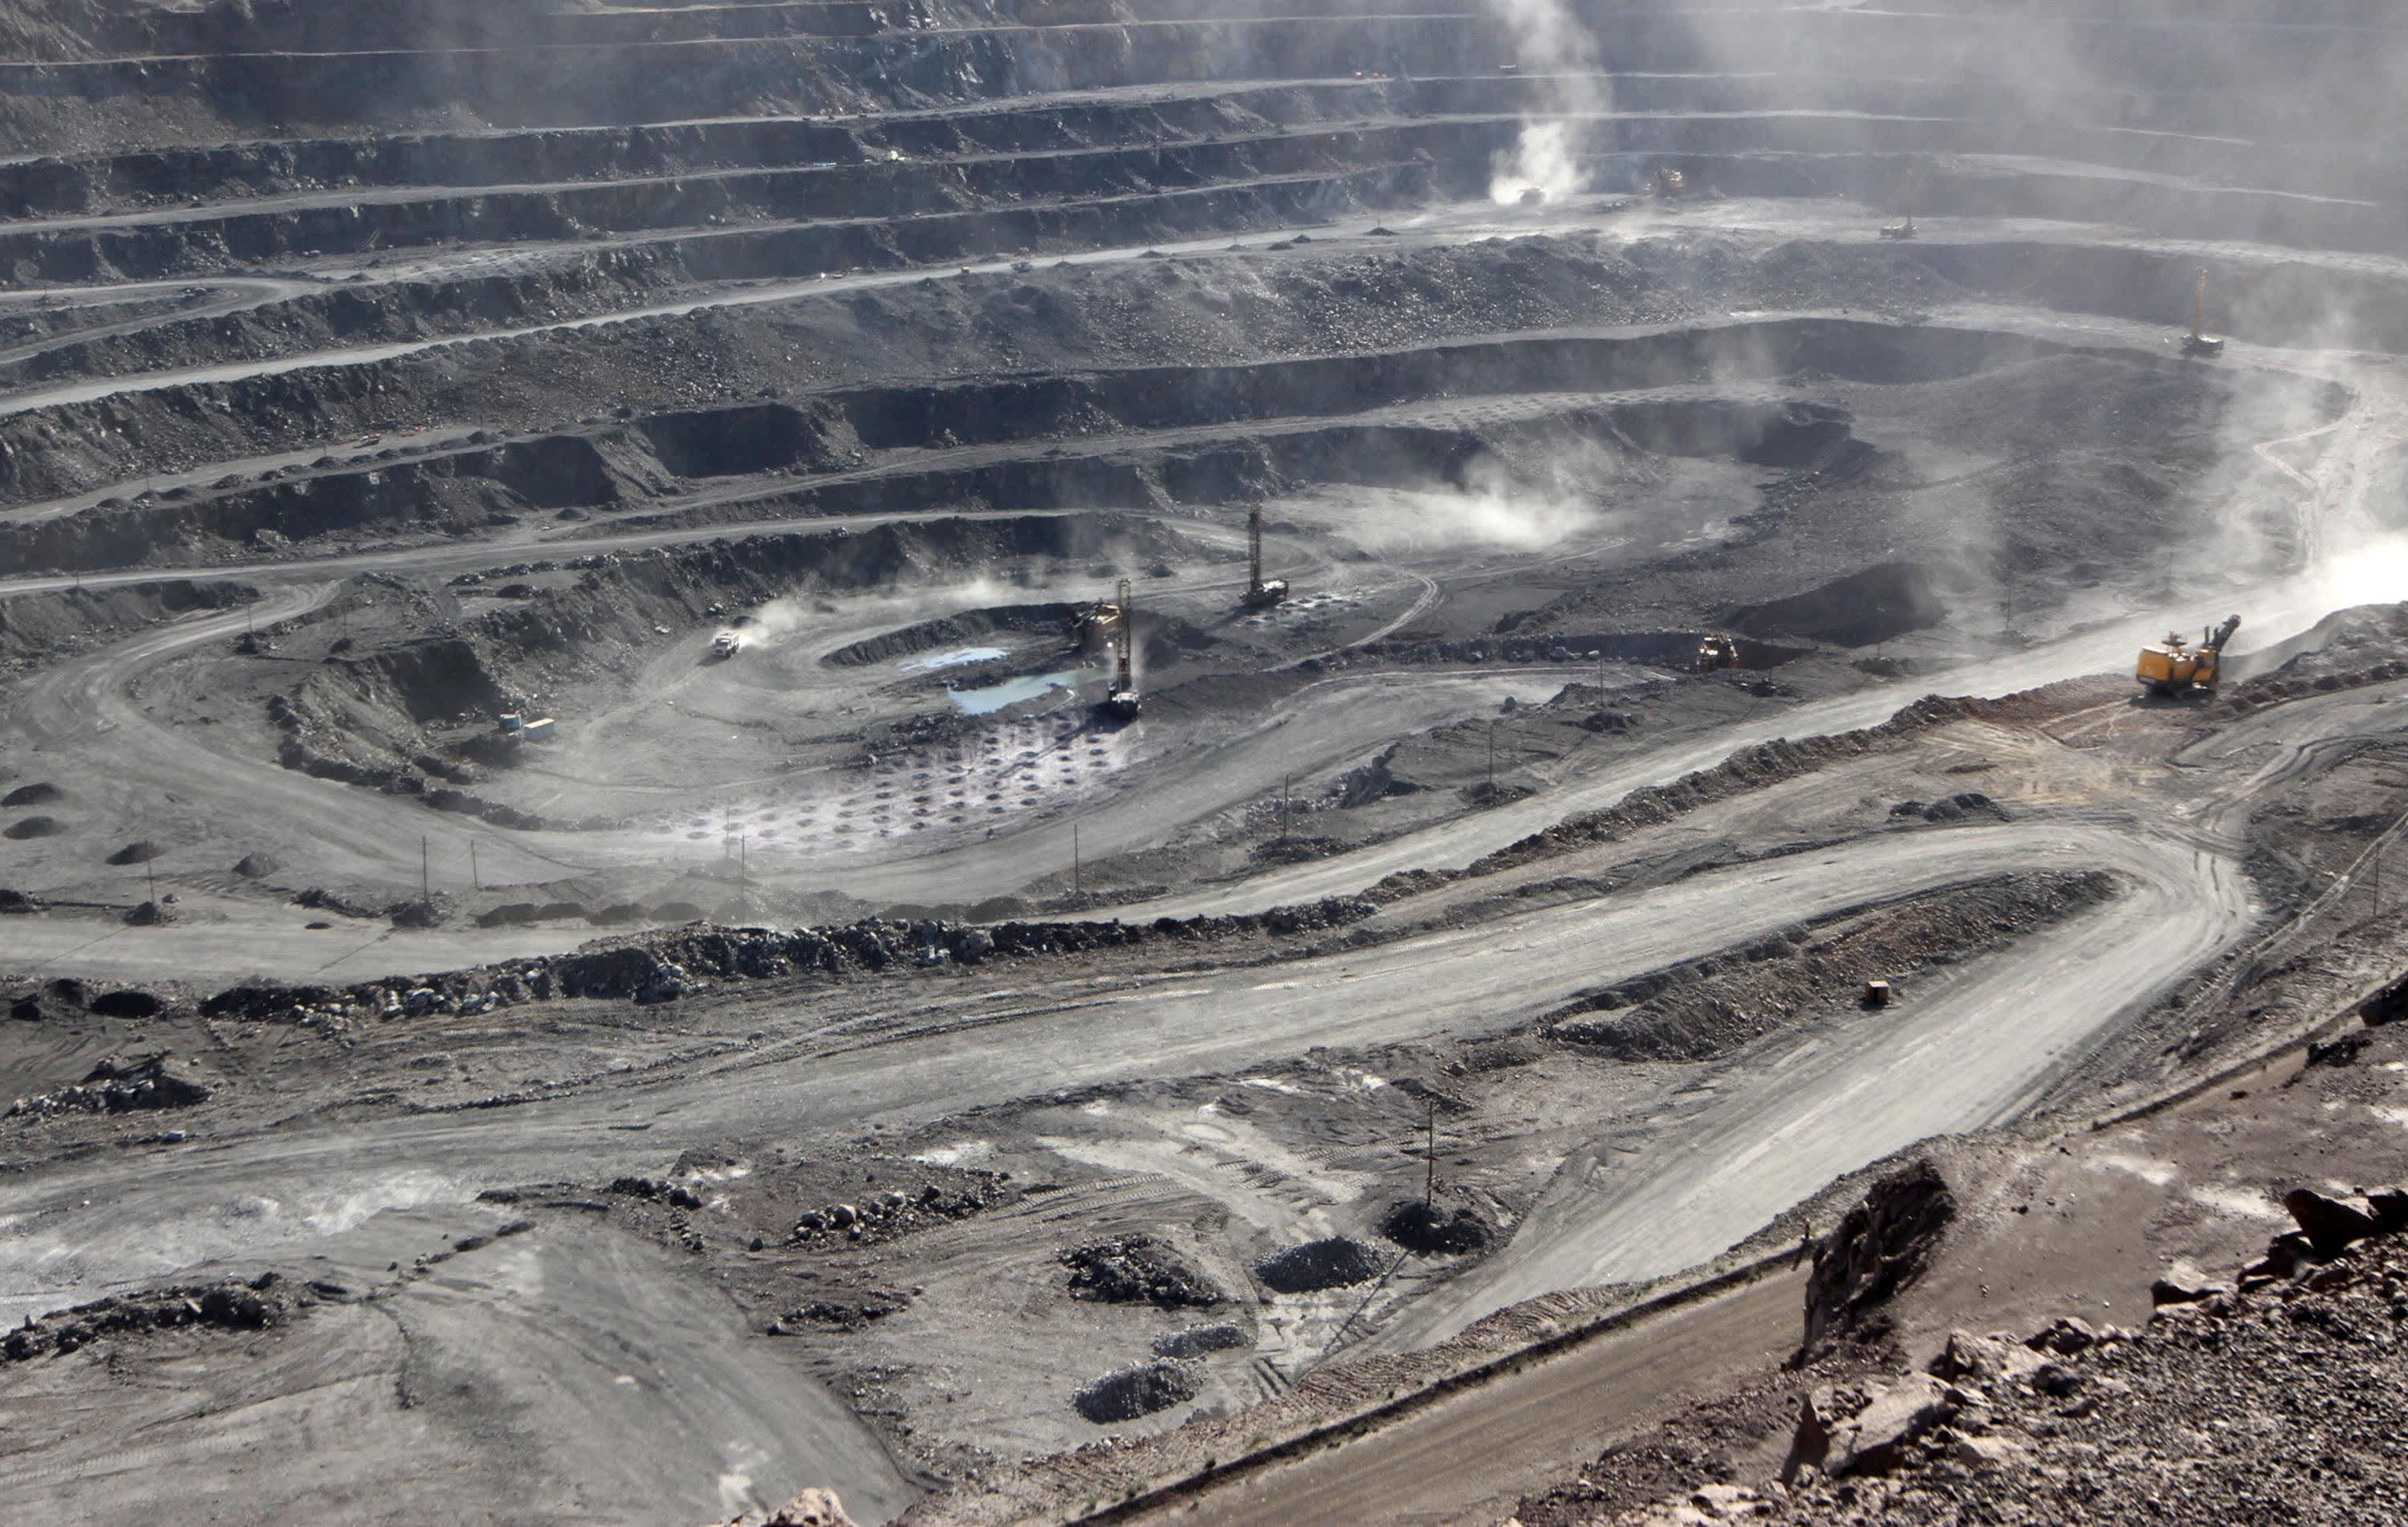 How China's control of rare earth minerals threatens the U.S.